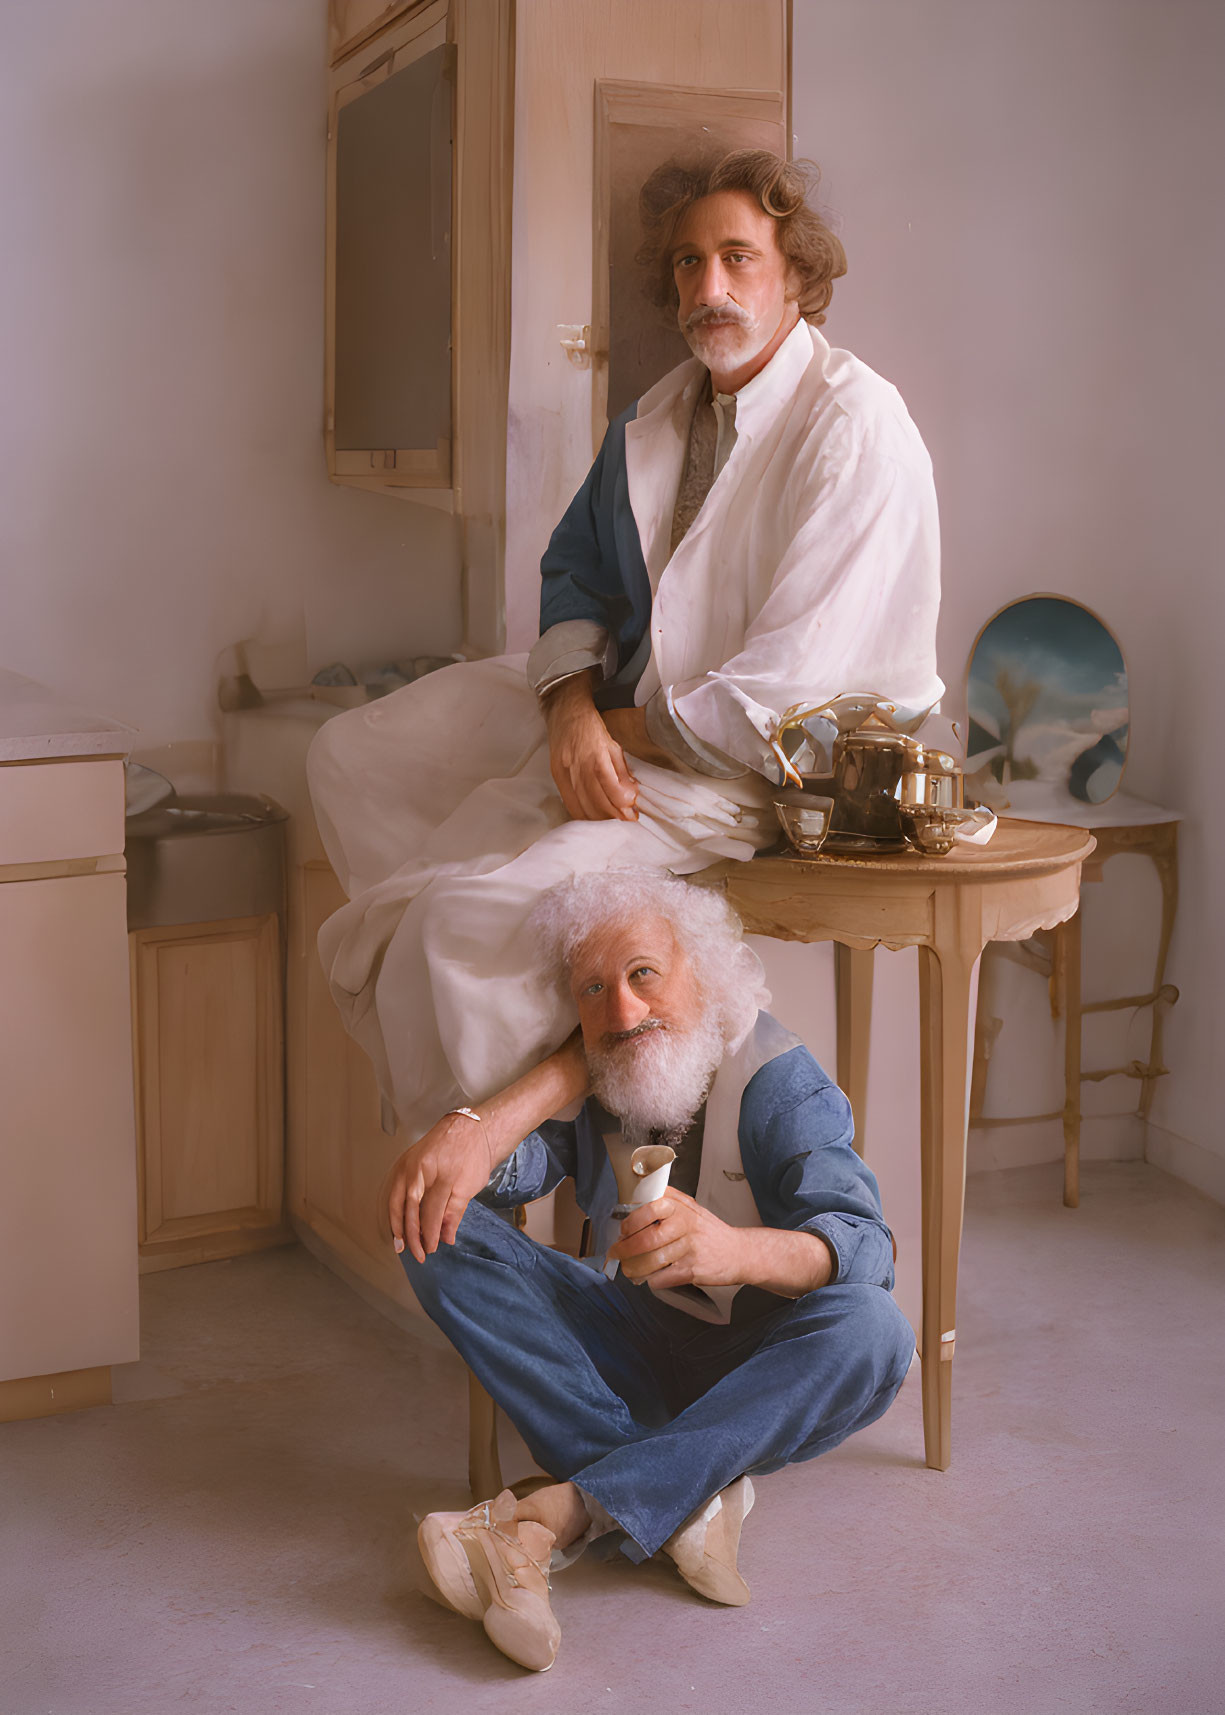 Vintage aesthetic room with two men, one standing with white drape, the other seated with white beard